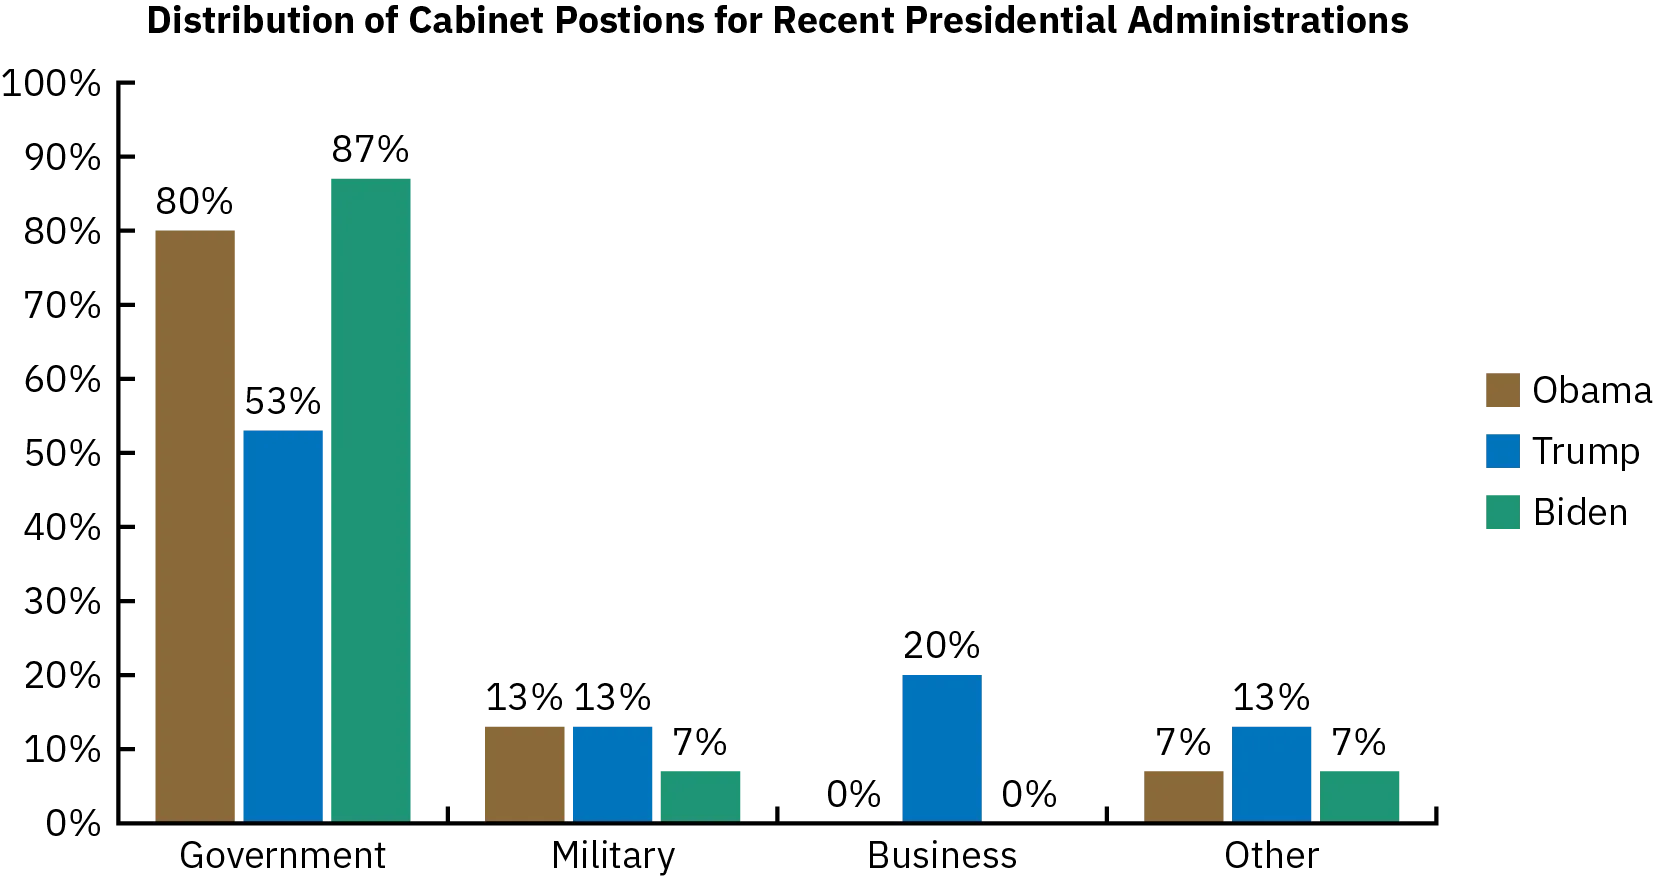 A bar graph shows the distribution of cabinet secretaries based on their previous employment background. In the Obama administration, 80% of cabinet secretaries had a government background, 13% had a military background, none had a business background, and 7% had “other” background. In the Trump administration, 53% of cabinet secretaries had a government background, 13% had a military background, 20% had a business background, and 13% had “other” background. In the Biden  administration, 87% of cabinet secretaries had a government background, 7% had a military background, none had a business background, and 7% had “other” background.